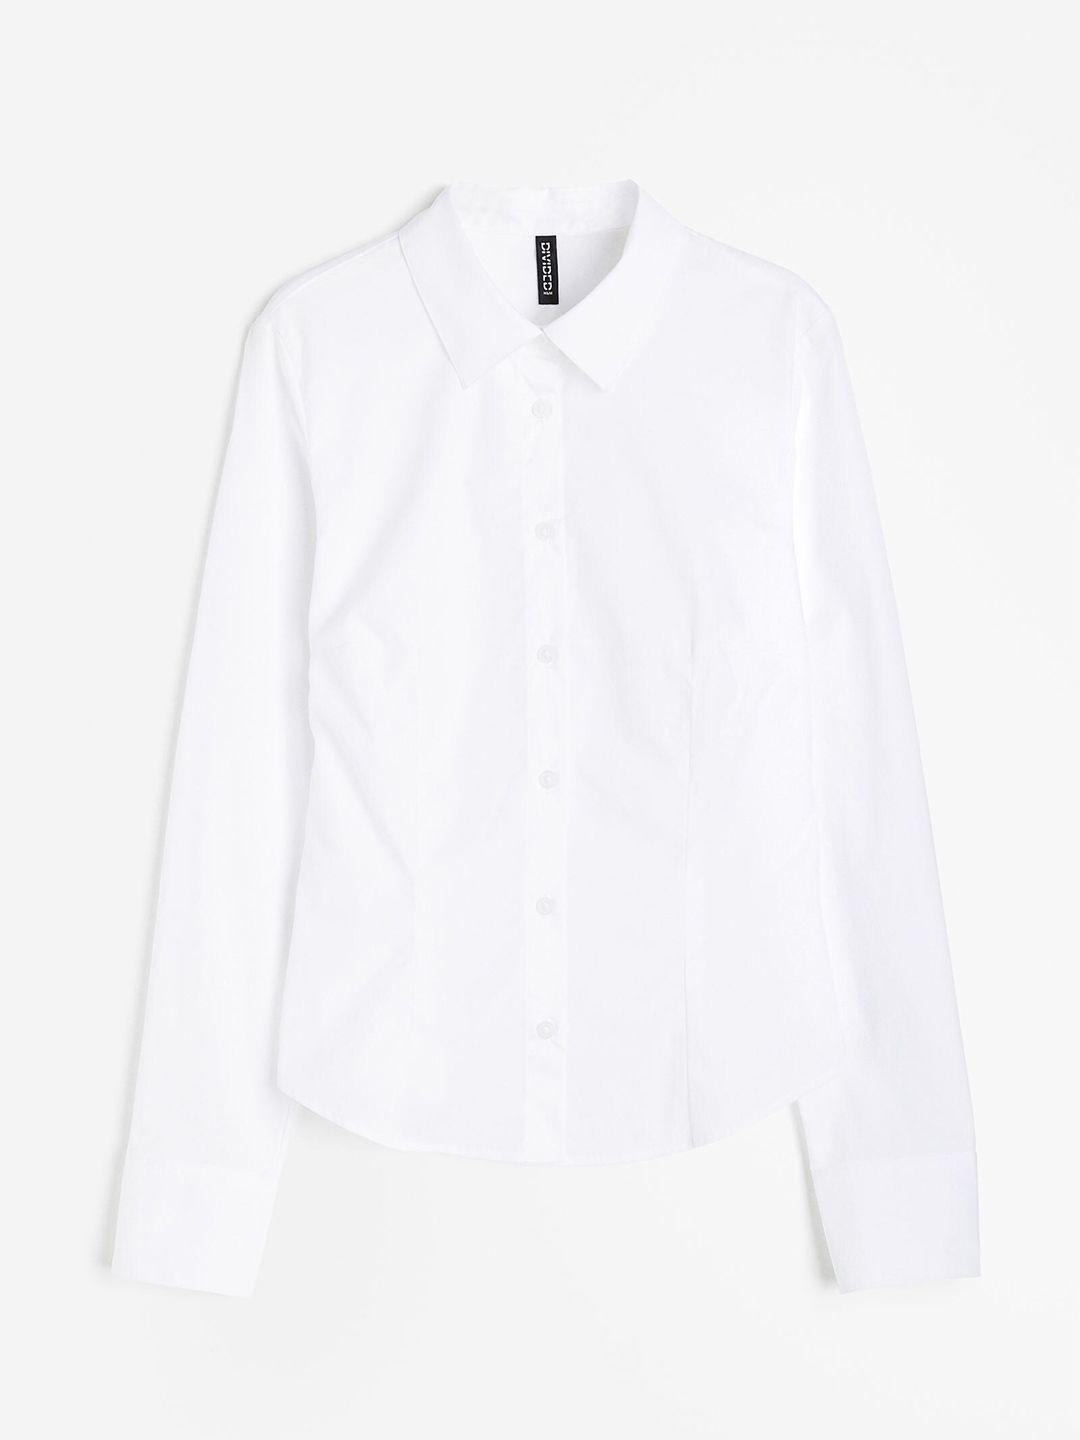 H&M Pure Cotton Fitted Poplin Shirt